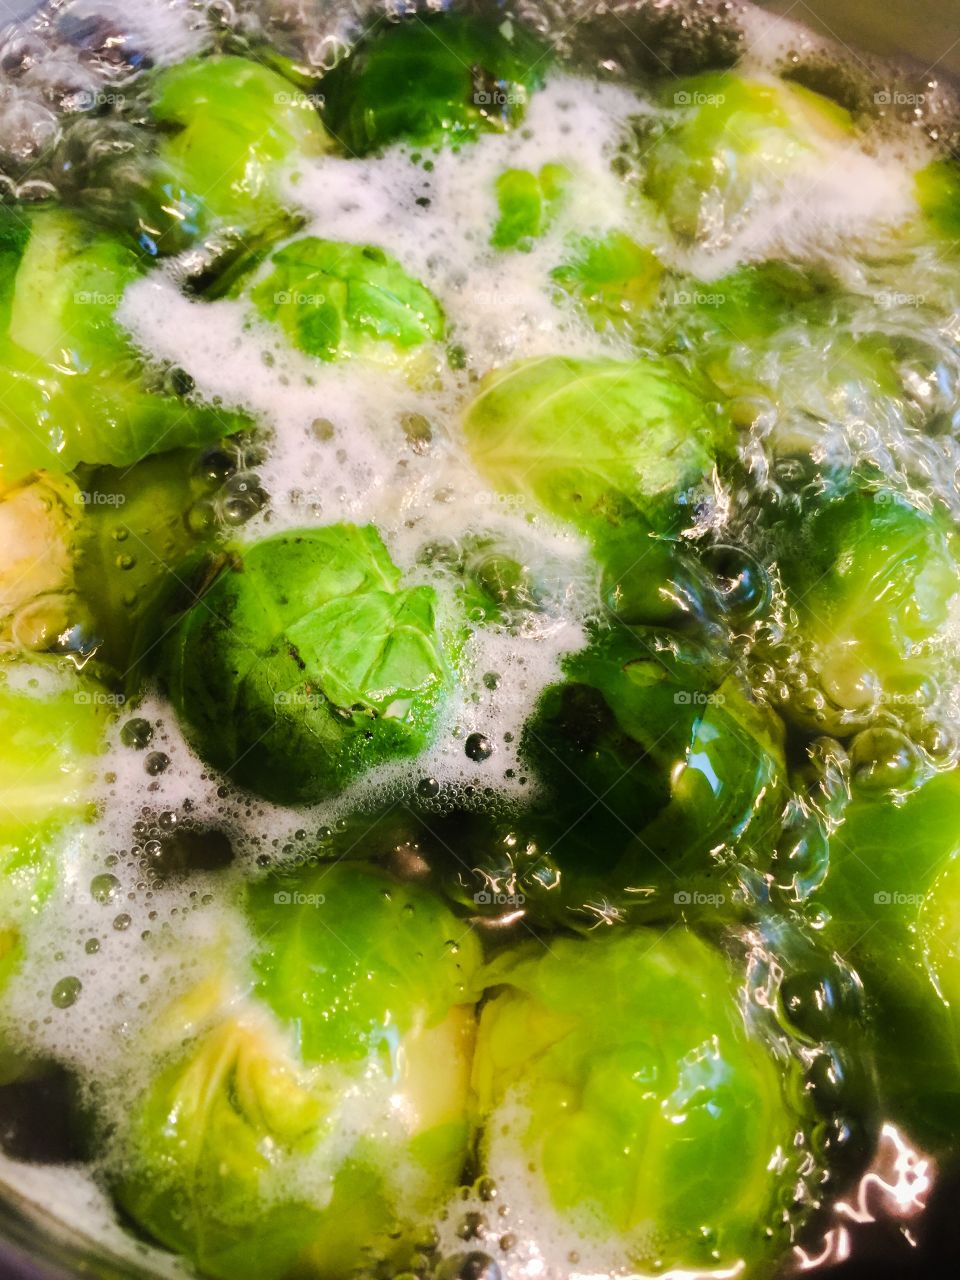 Cooking Brussels 